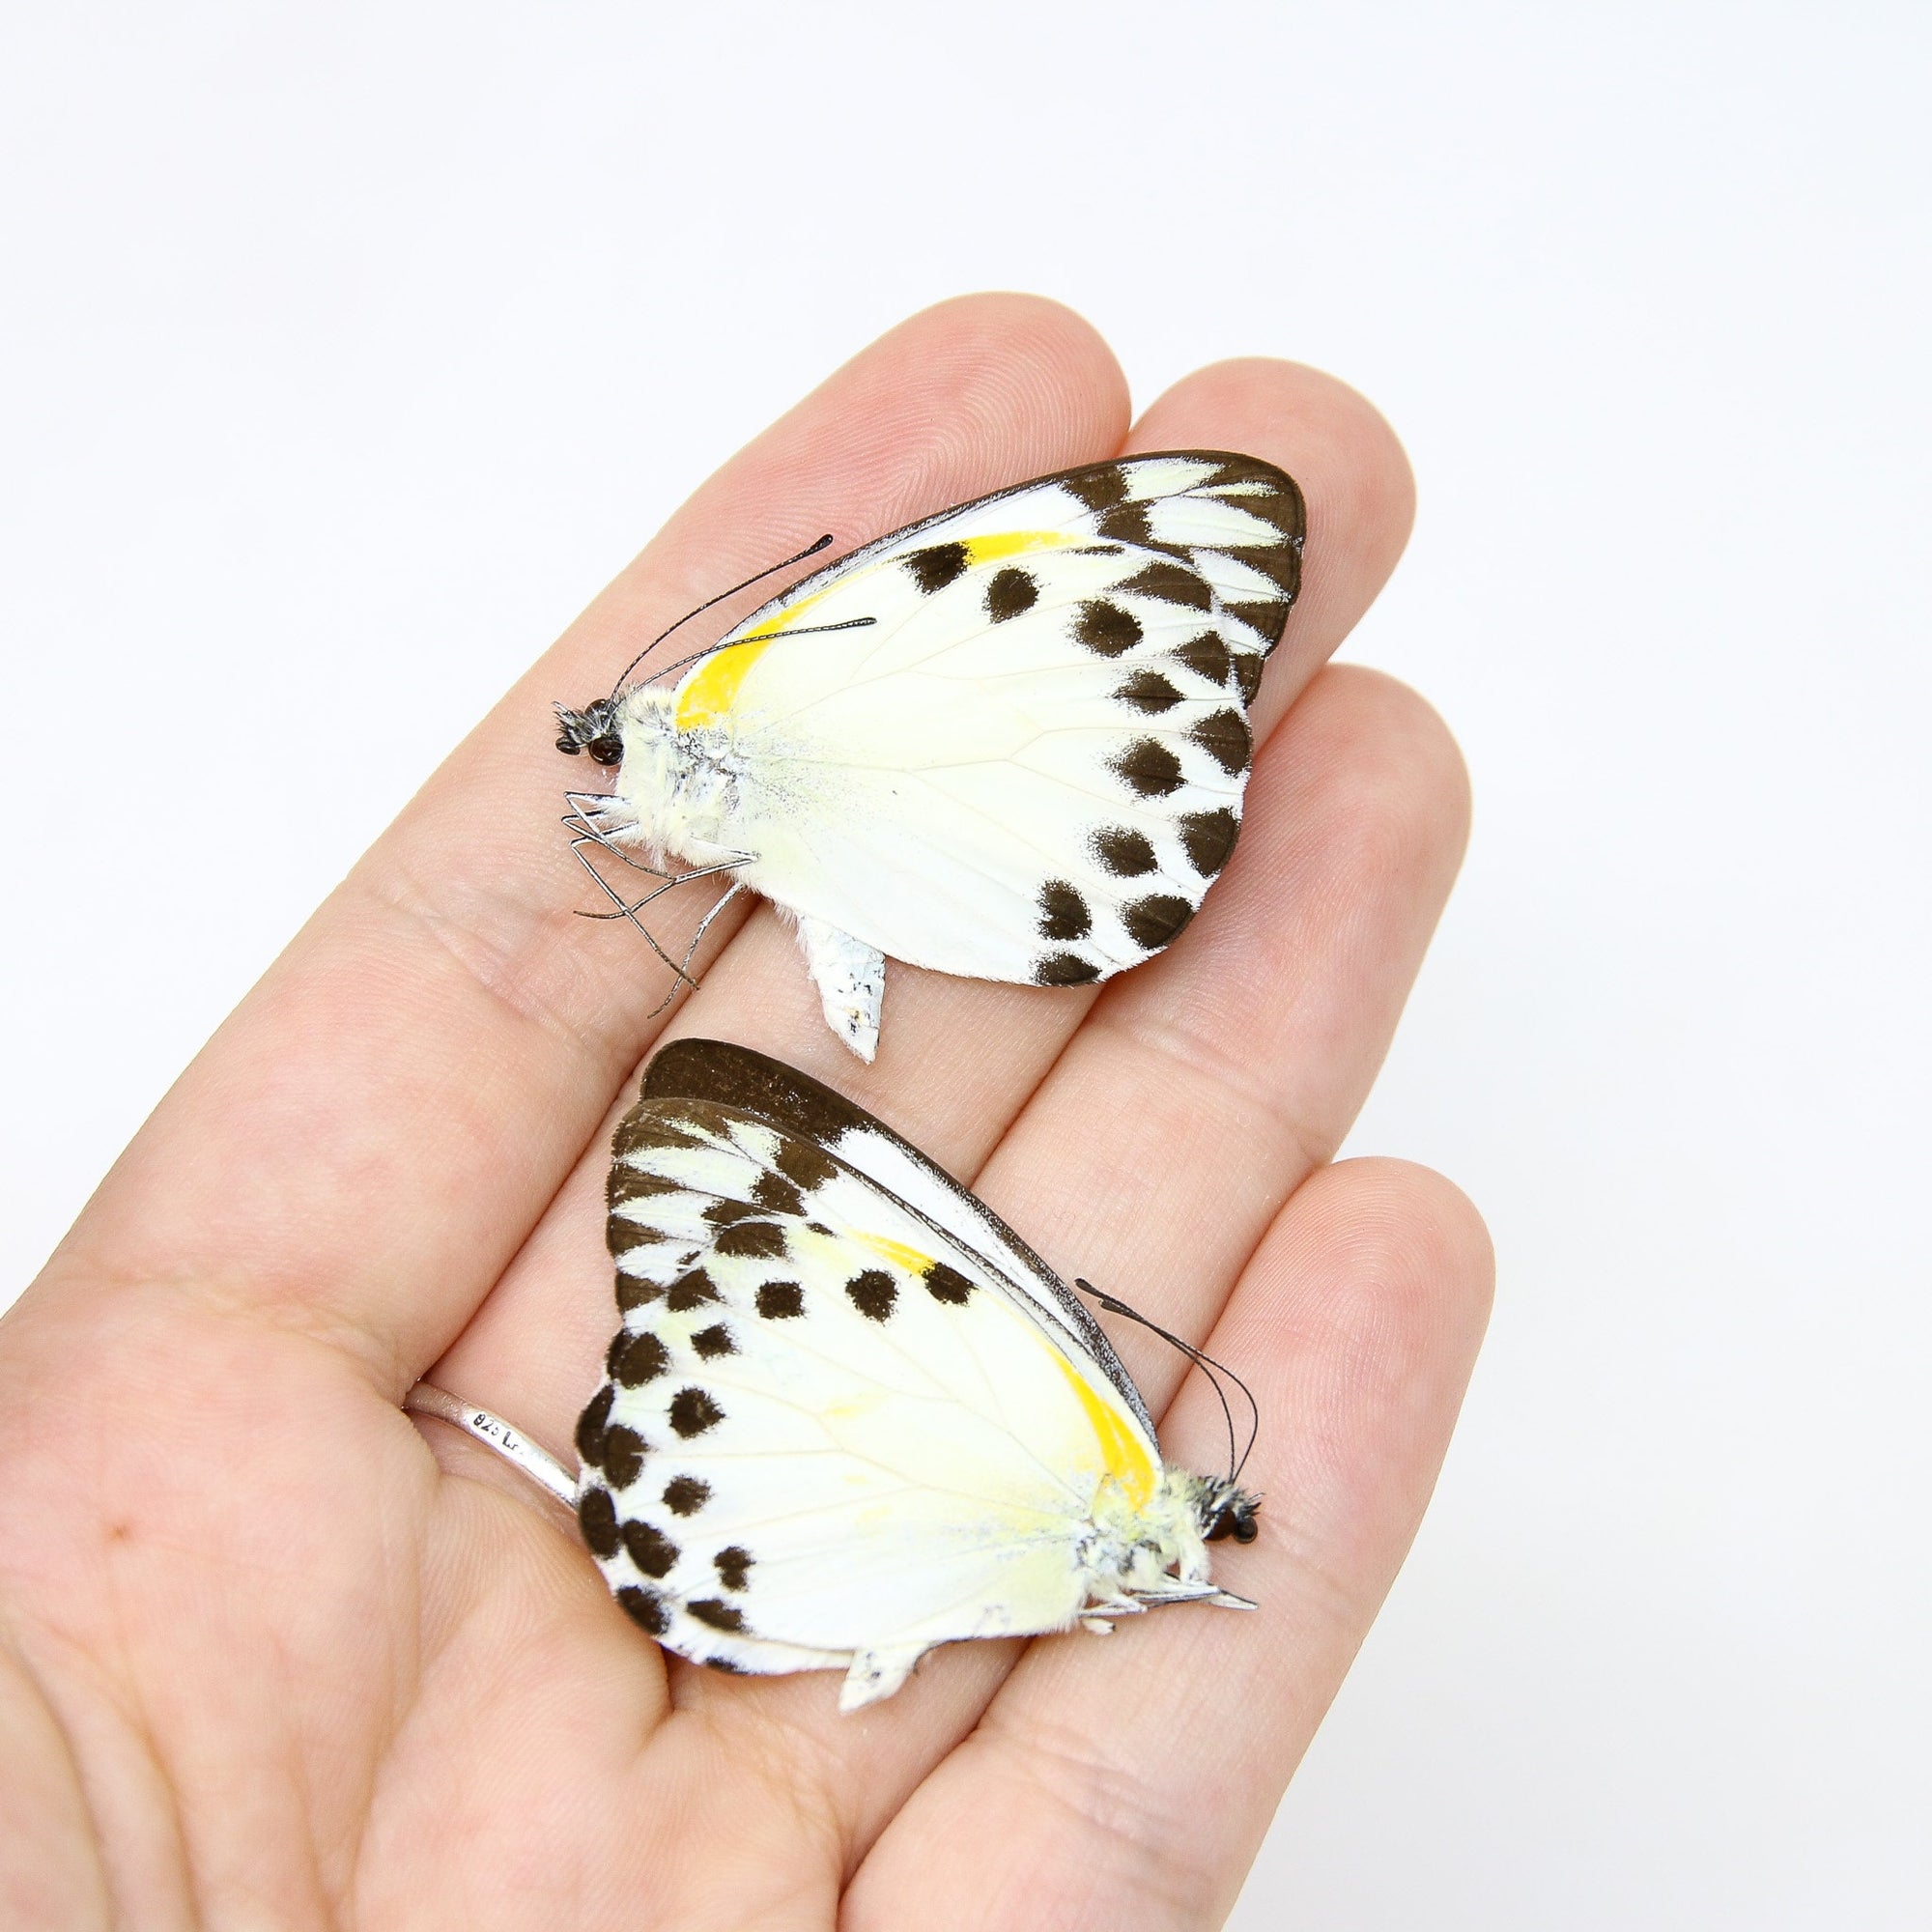 Two (2) Belenois theora, Forest Caper White, A1 Real Dry-Preserved Unmounted Butterflies, Entomology Taxidermy Specimens